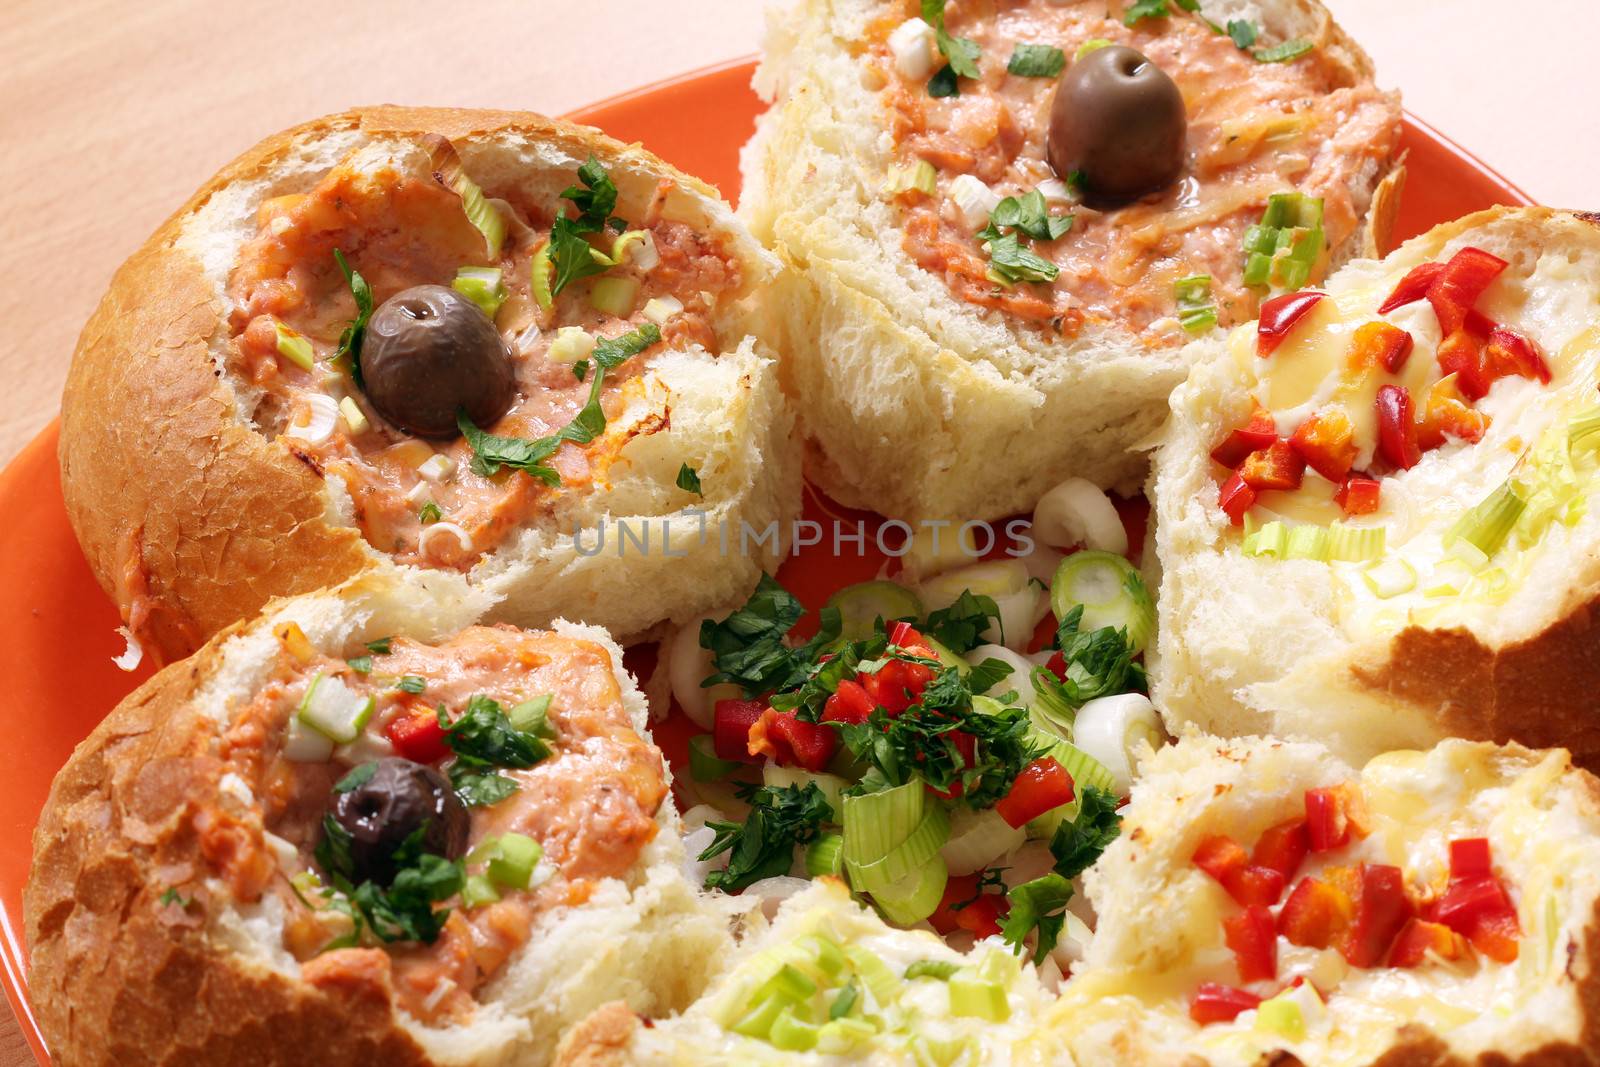 bread filled with cheese eggs and vegetables